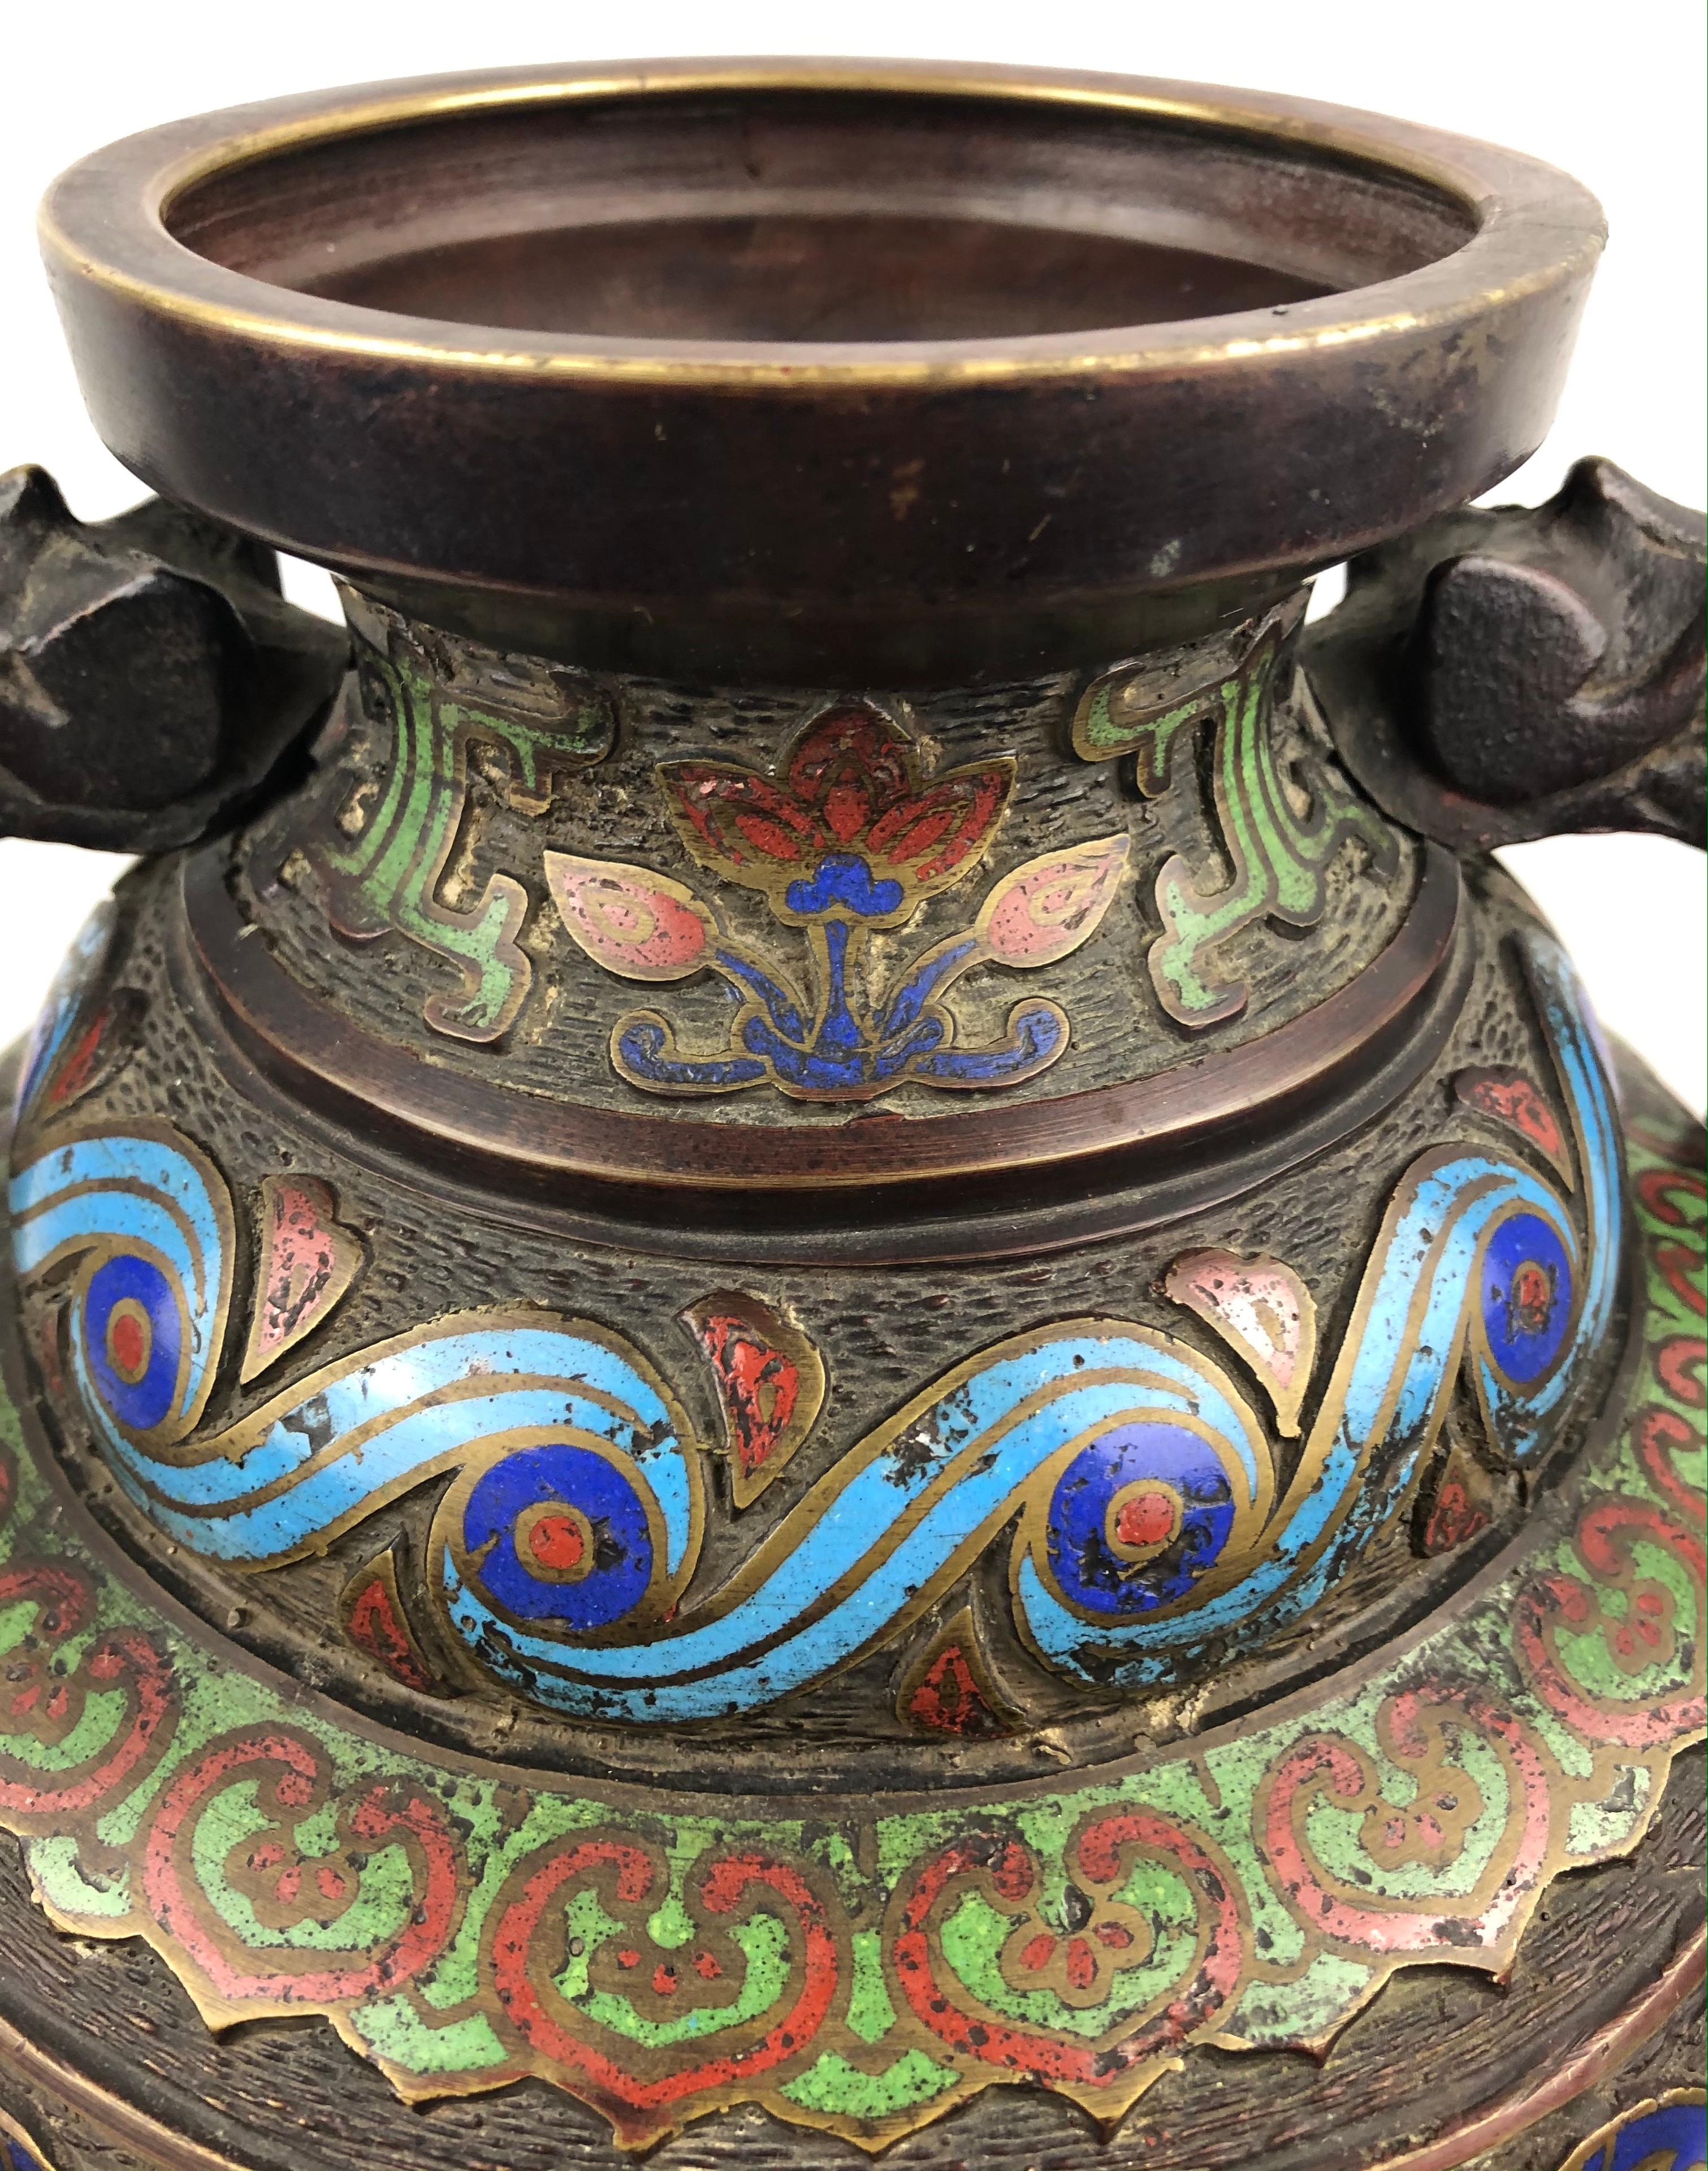 Excellent quality example of fine Japanese bronze cloisonne vase from the Meiji era.

The Meiji period is a Japanese era which extended from 1868 to 1912. It corresponds to the reign of Emperor Meiji. 

Measures: 11 3/4